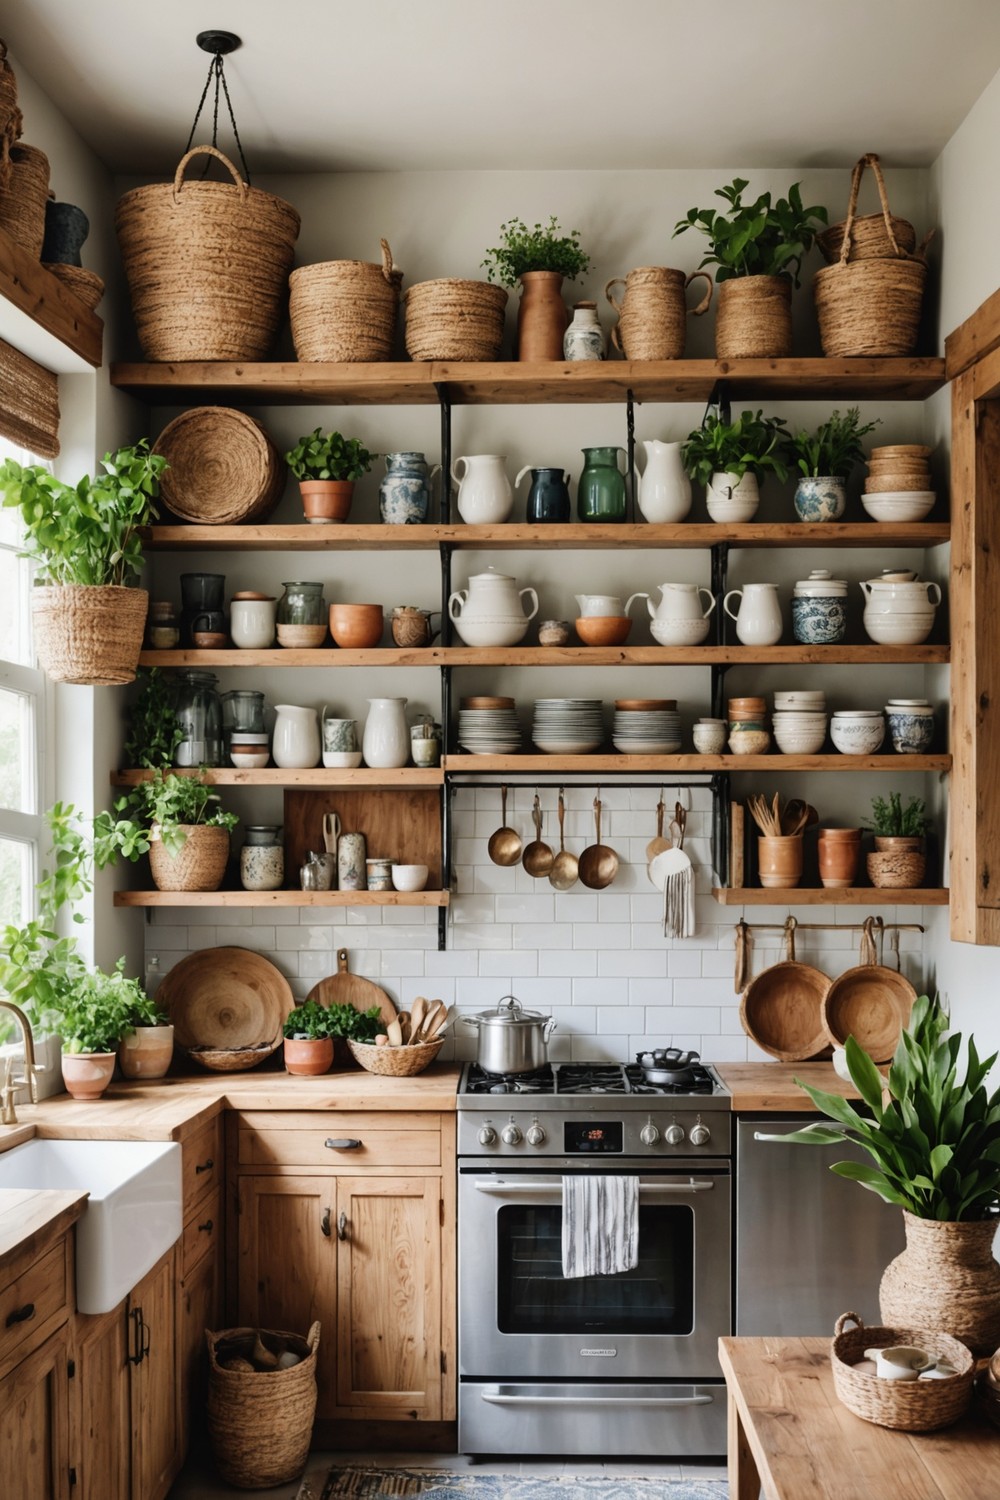 Open Shelving with Baskets